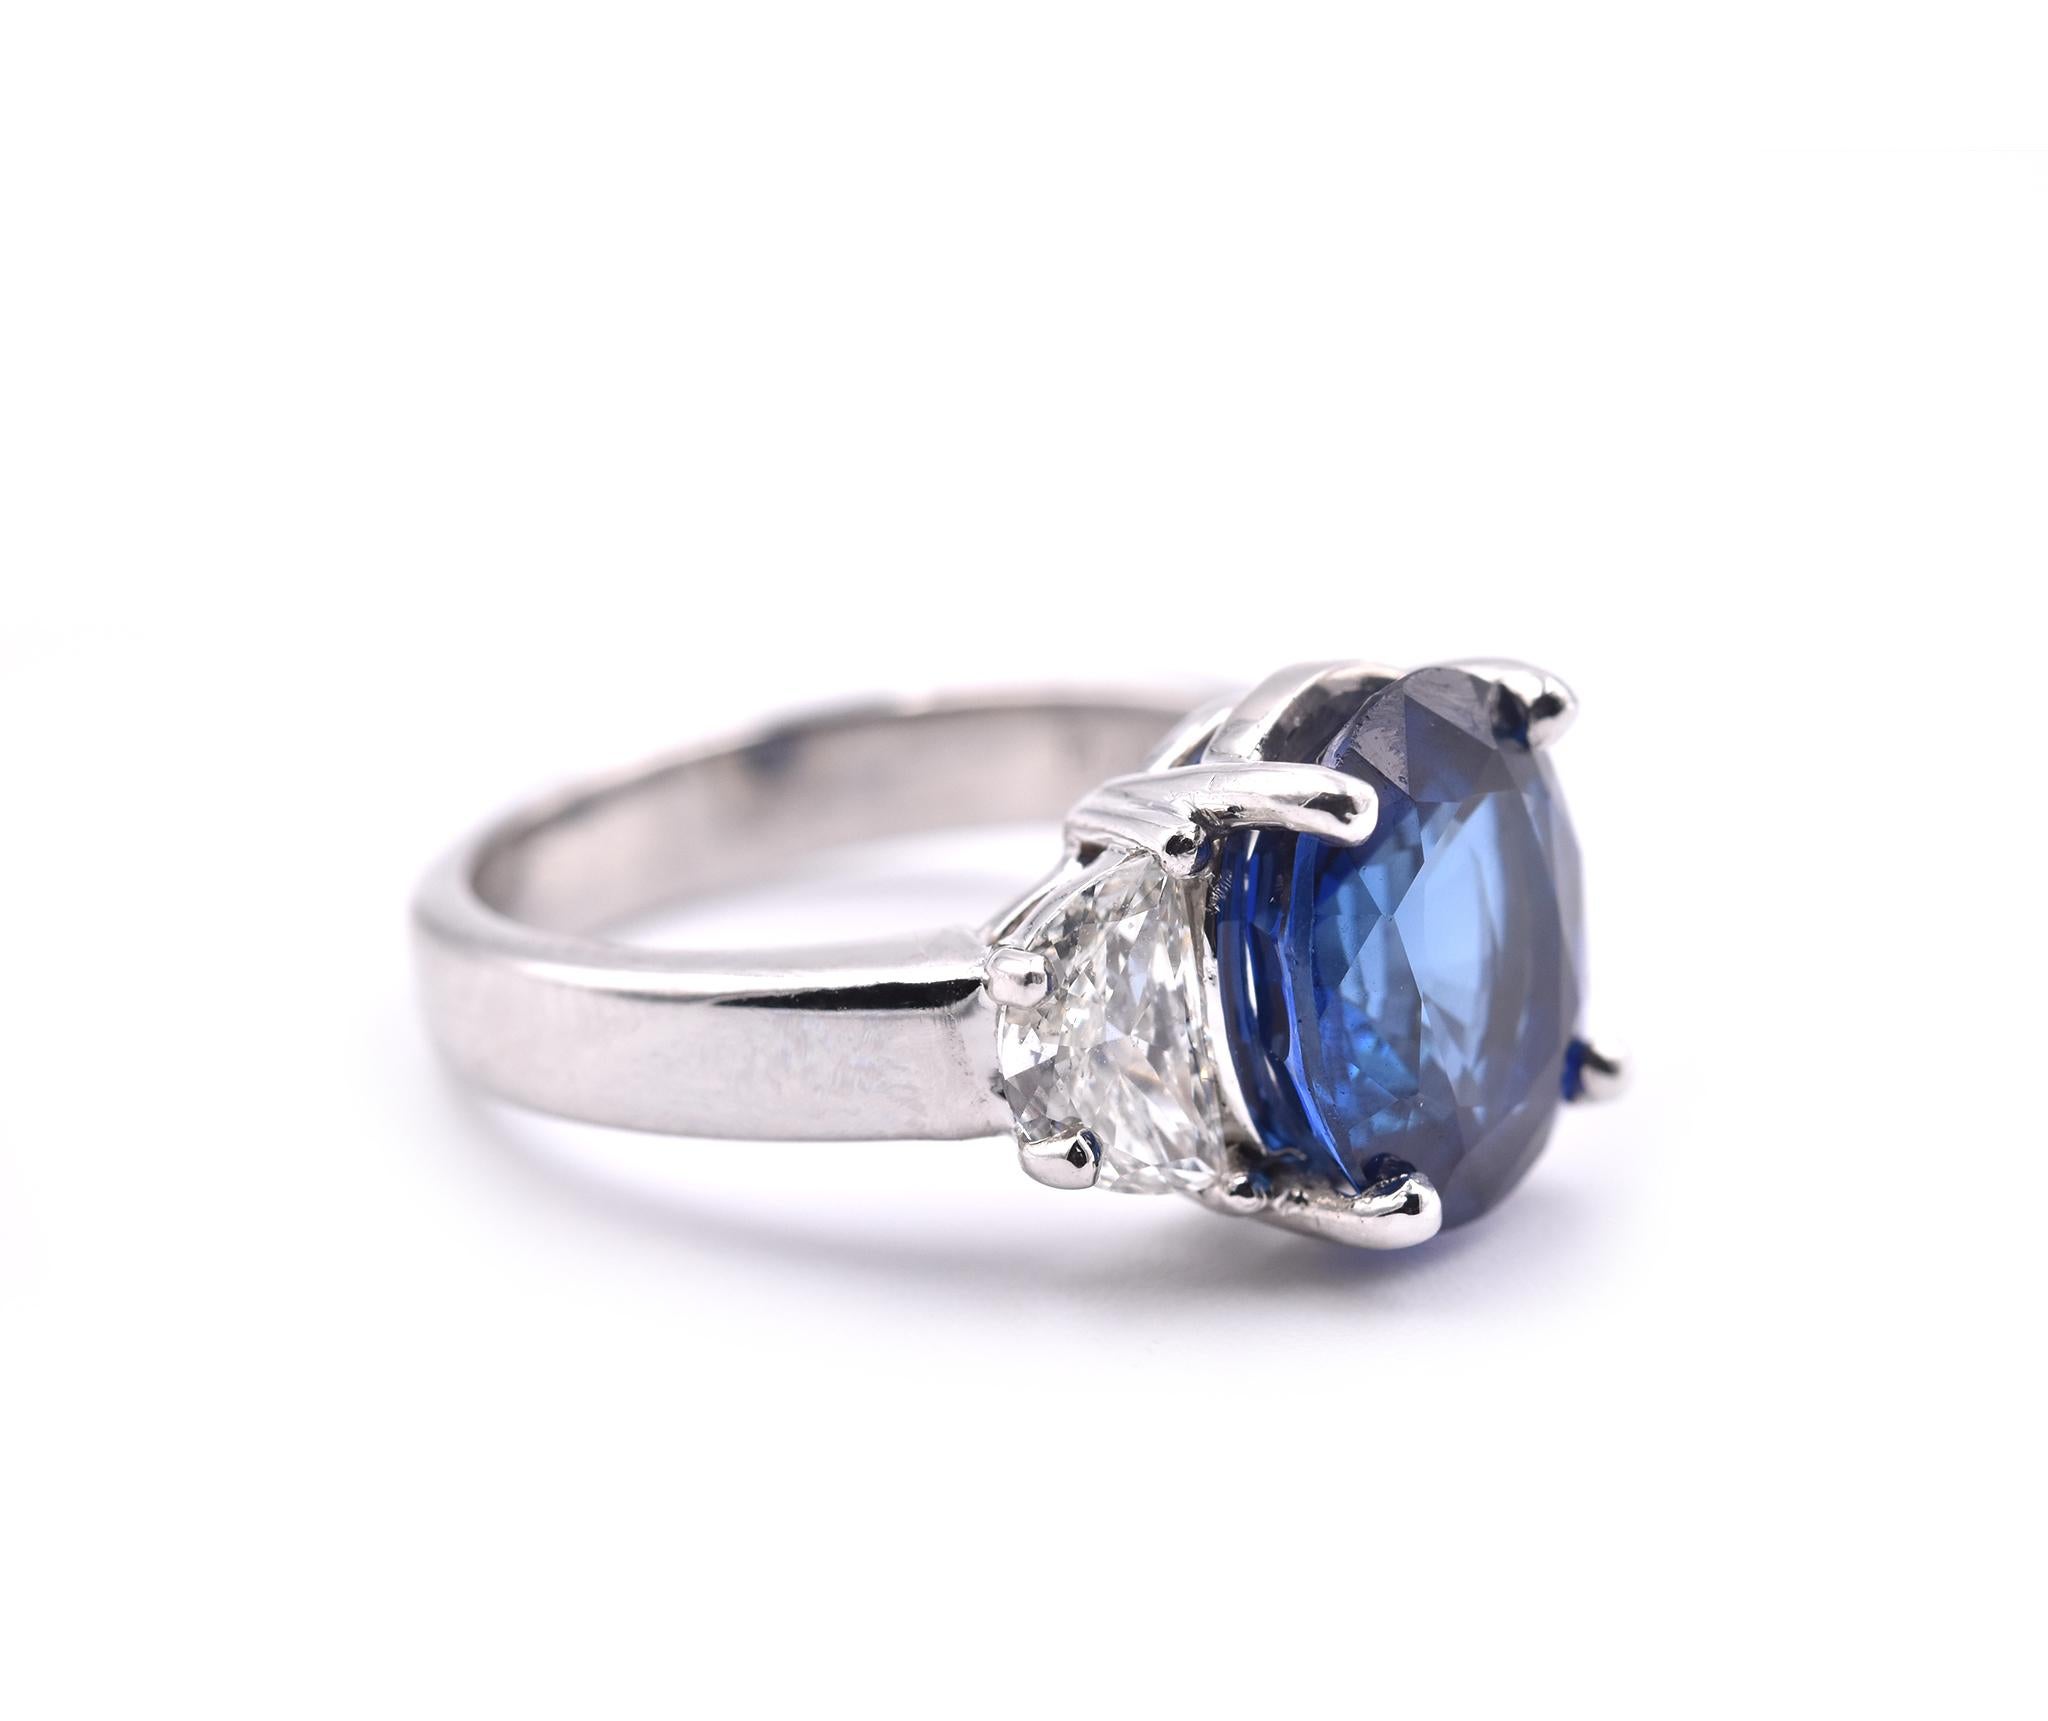 Designer: custom design
Material: platinum
Sapphire: 1 oval cut= 4.10ct  GIA Cert# 2205232384
Diamonds: 2 half-moon cut= 1.00cttw
Ring Size: 5 ½ (please allow two additional shipping days for any sizing requests)
Dimensions: ring top is 10.67mm by